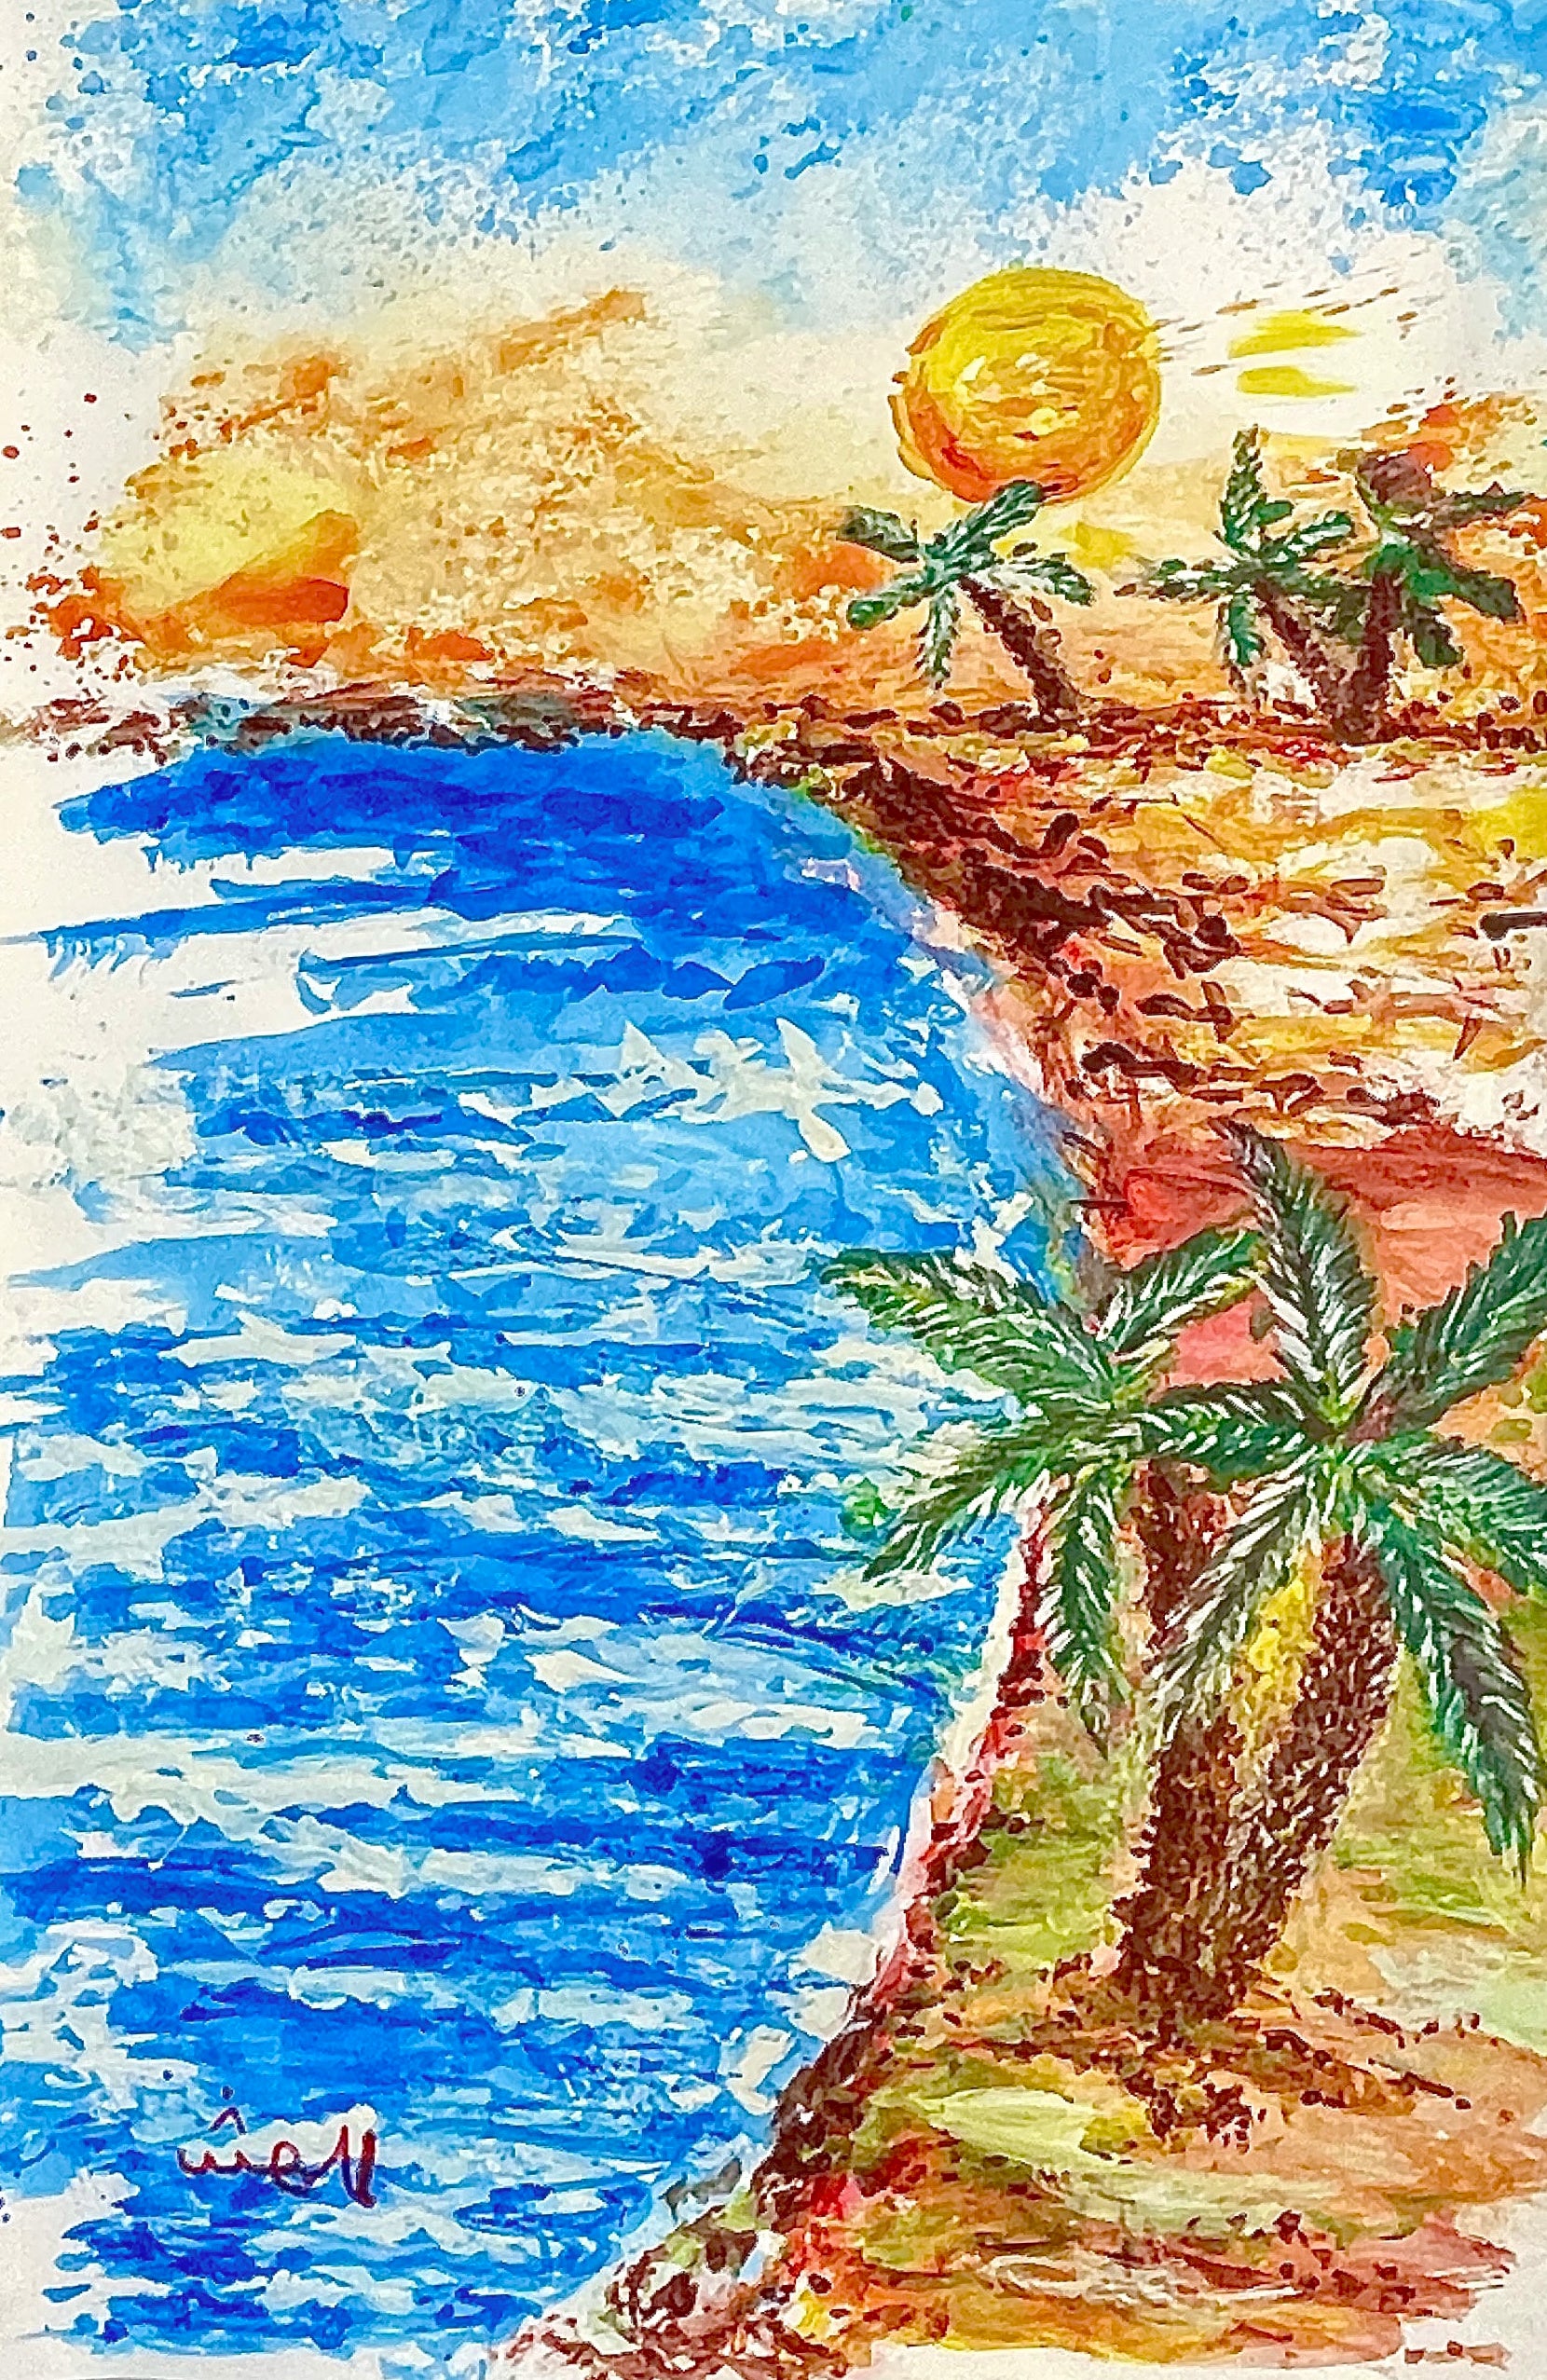 BEHRAYM-Sonarta.com, This beach scene painting is dedicated to everyone in ABADAN . The setting is acsunset at the beach with calm waves. This is a perfect time and place for a walk.  An Acrylic on Paper Wall Art Decor was created by Shahla Rahimi Reynolds.  The painting is 48” H x 30” W. #shahla_rahimi_reynolds